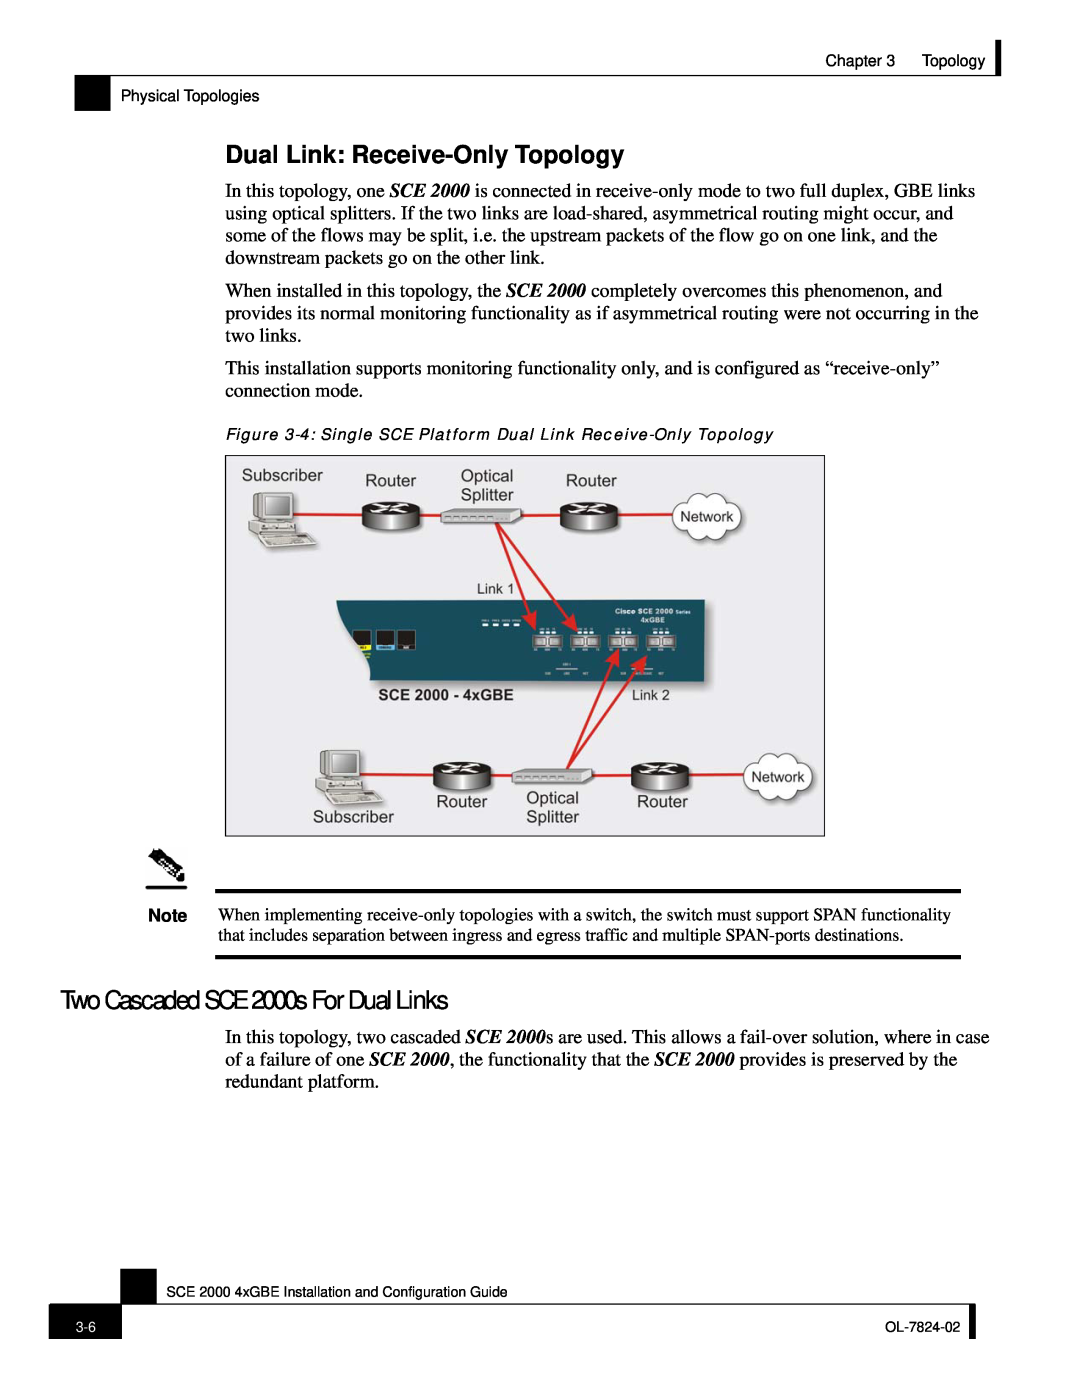 Cisco Systems SCE 2000 4xGBE manual Two Cascaded SCE 2000s For Dual Links, Dual Link Receive-Only Topology 